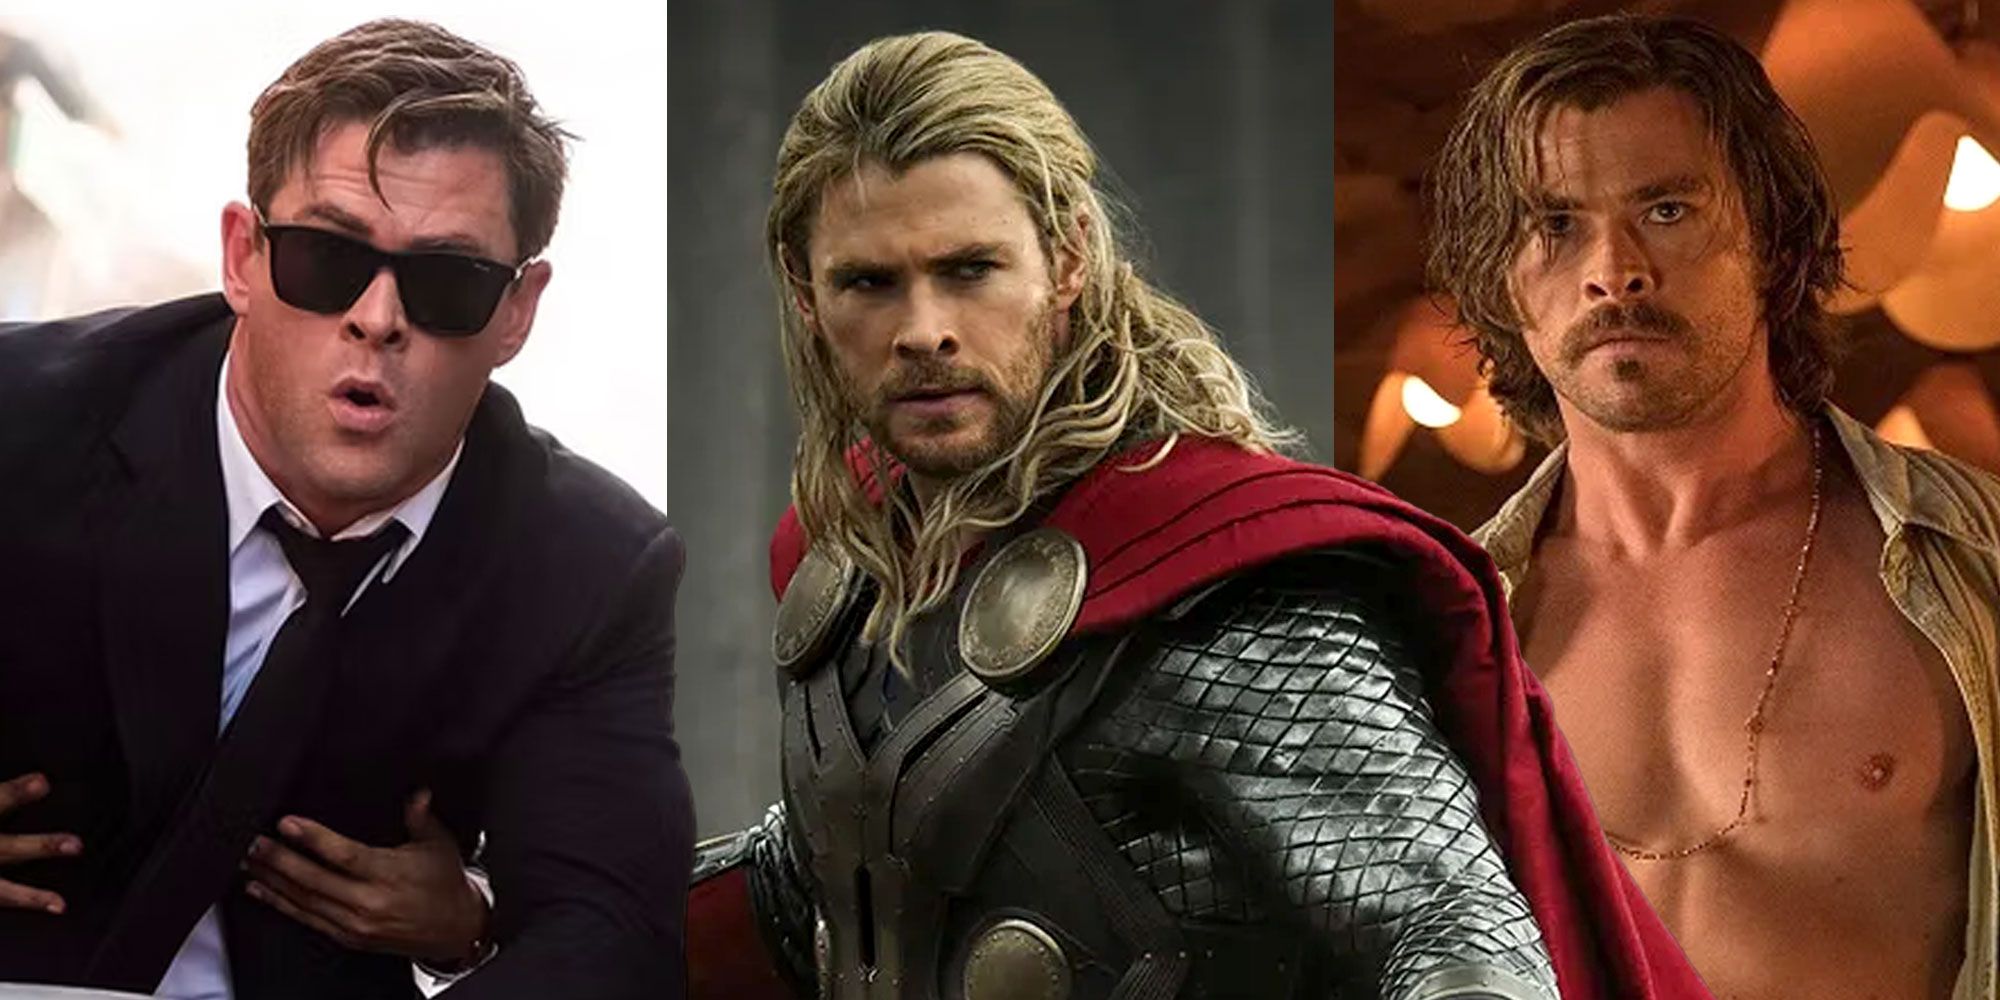 A split image features Chris Hemsworth as characters in Men In Black International, Thor, and Bad Times At The El Royale